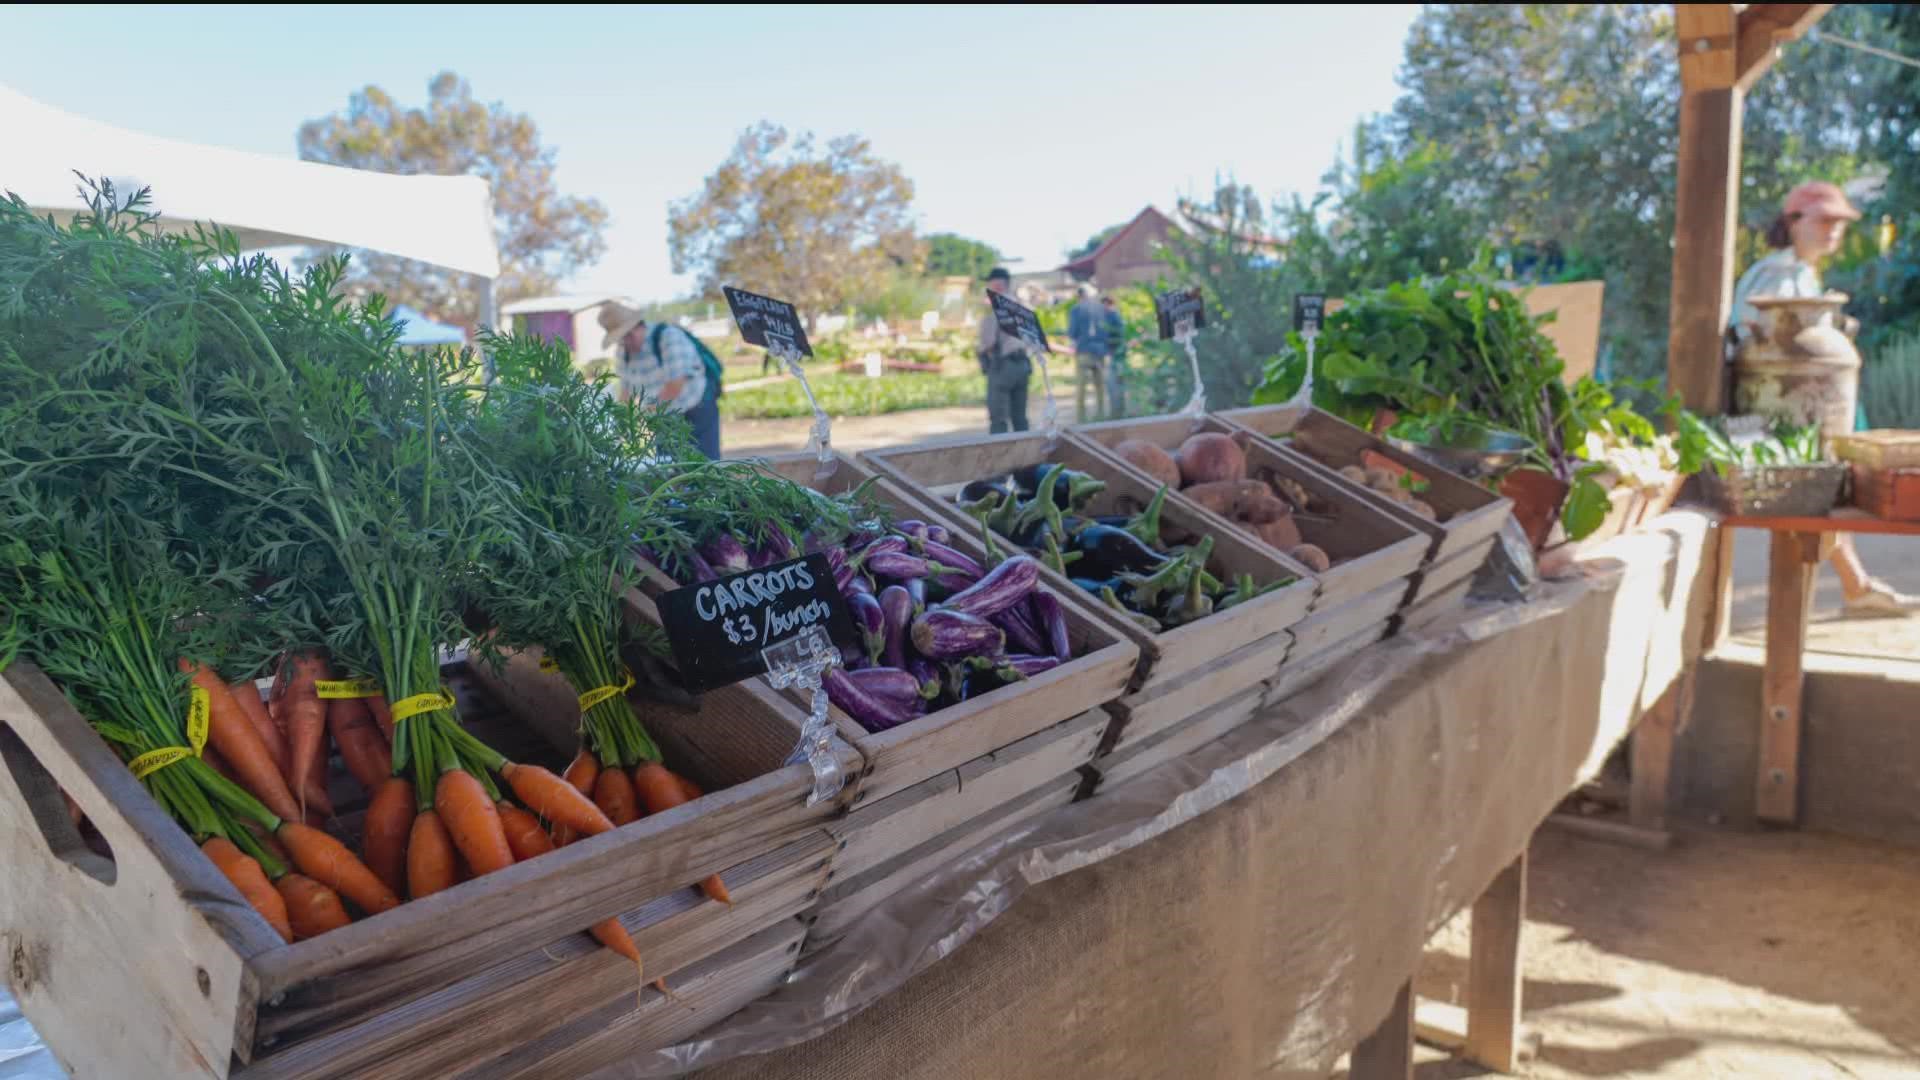 Coastal Roots Farm is on a mission to help create a healthy and connected community. The farm is also participating in Giving Tuesday.